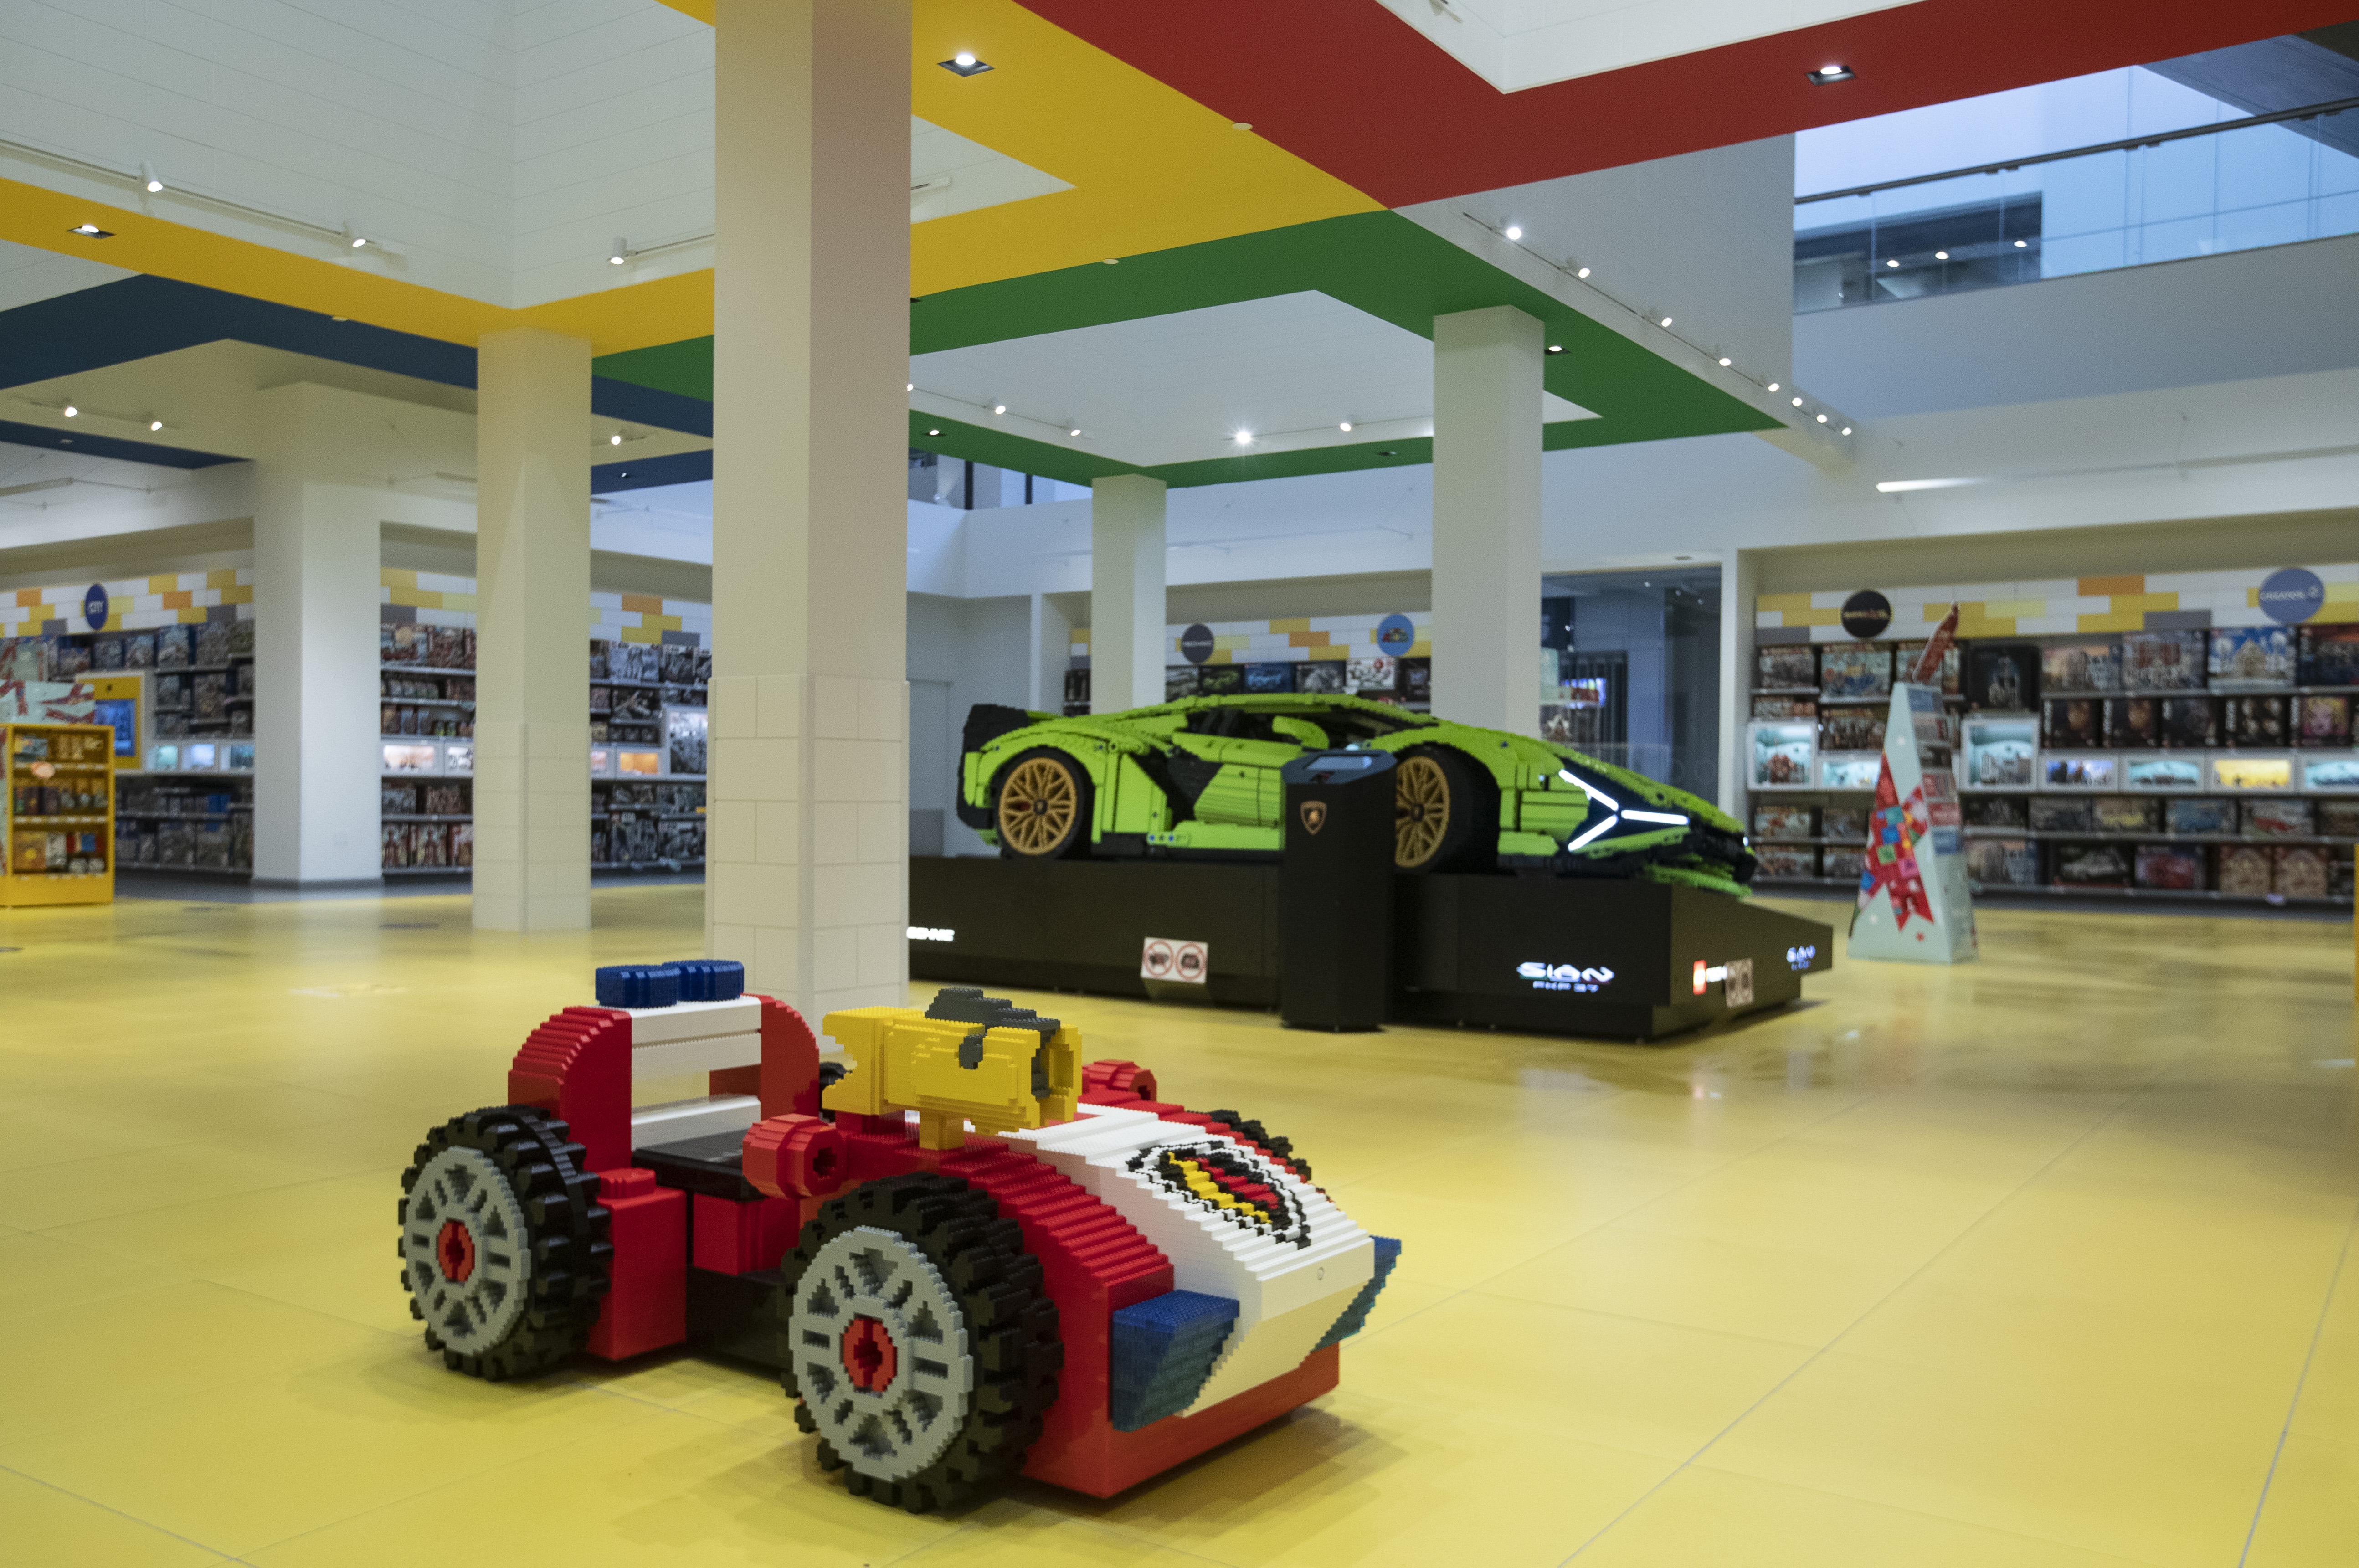 news: Edmonton's Lego Store offers diversions for all ages The Globe and Mail